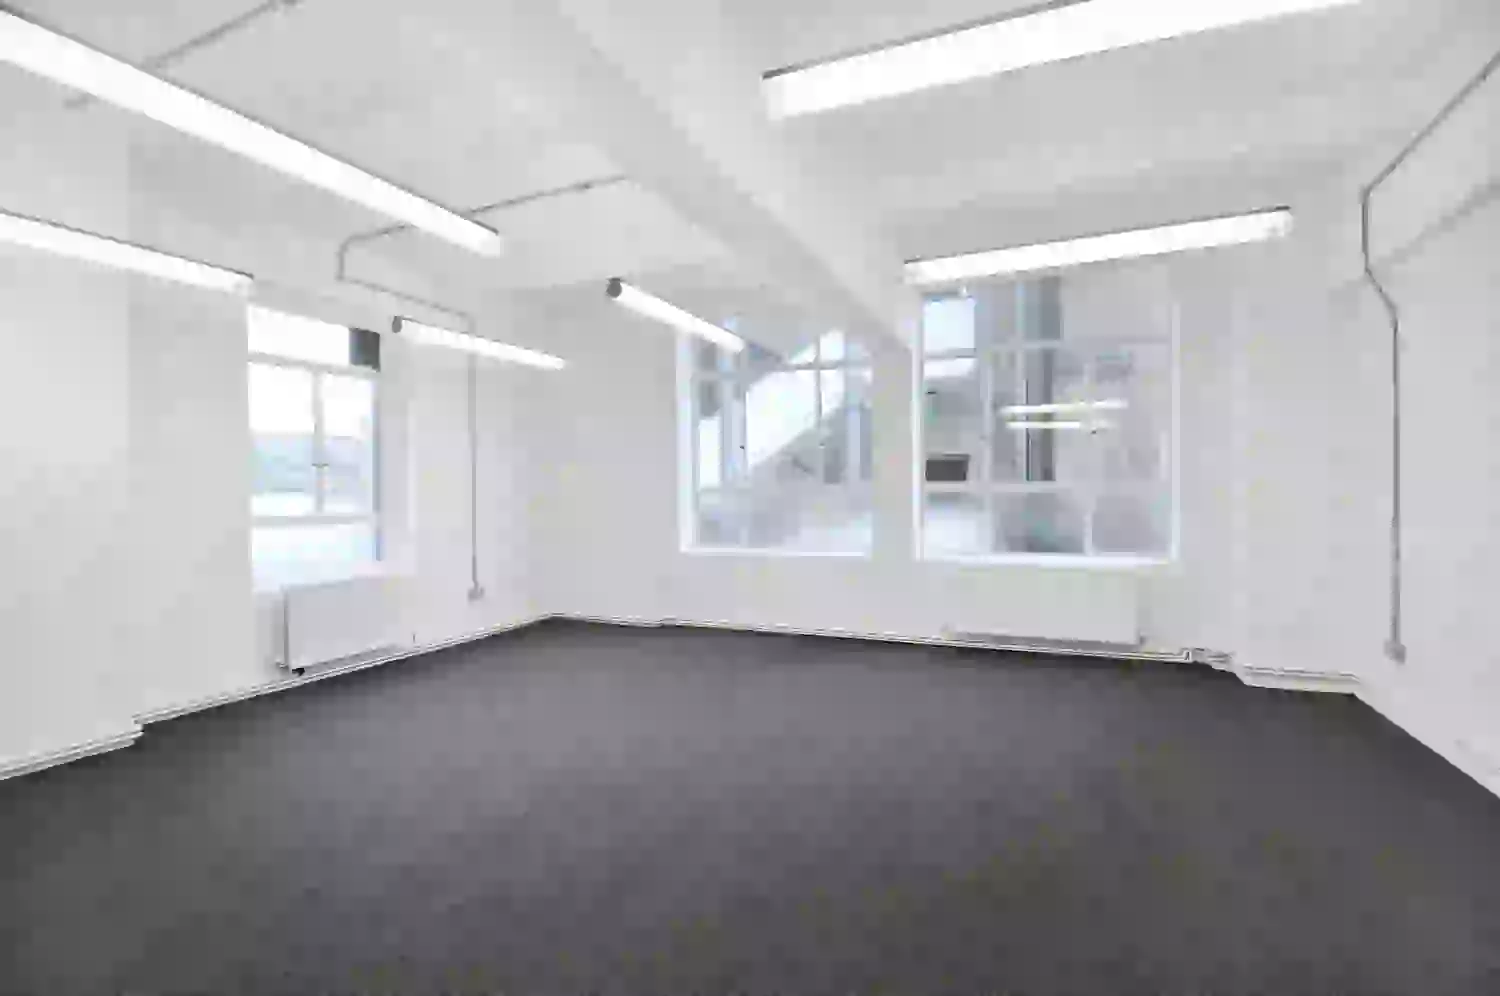 Office space to rent at The Biscuit Factory, Drummond Road, London, unit TB.K106, 495 sq ft (45 sq m).